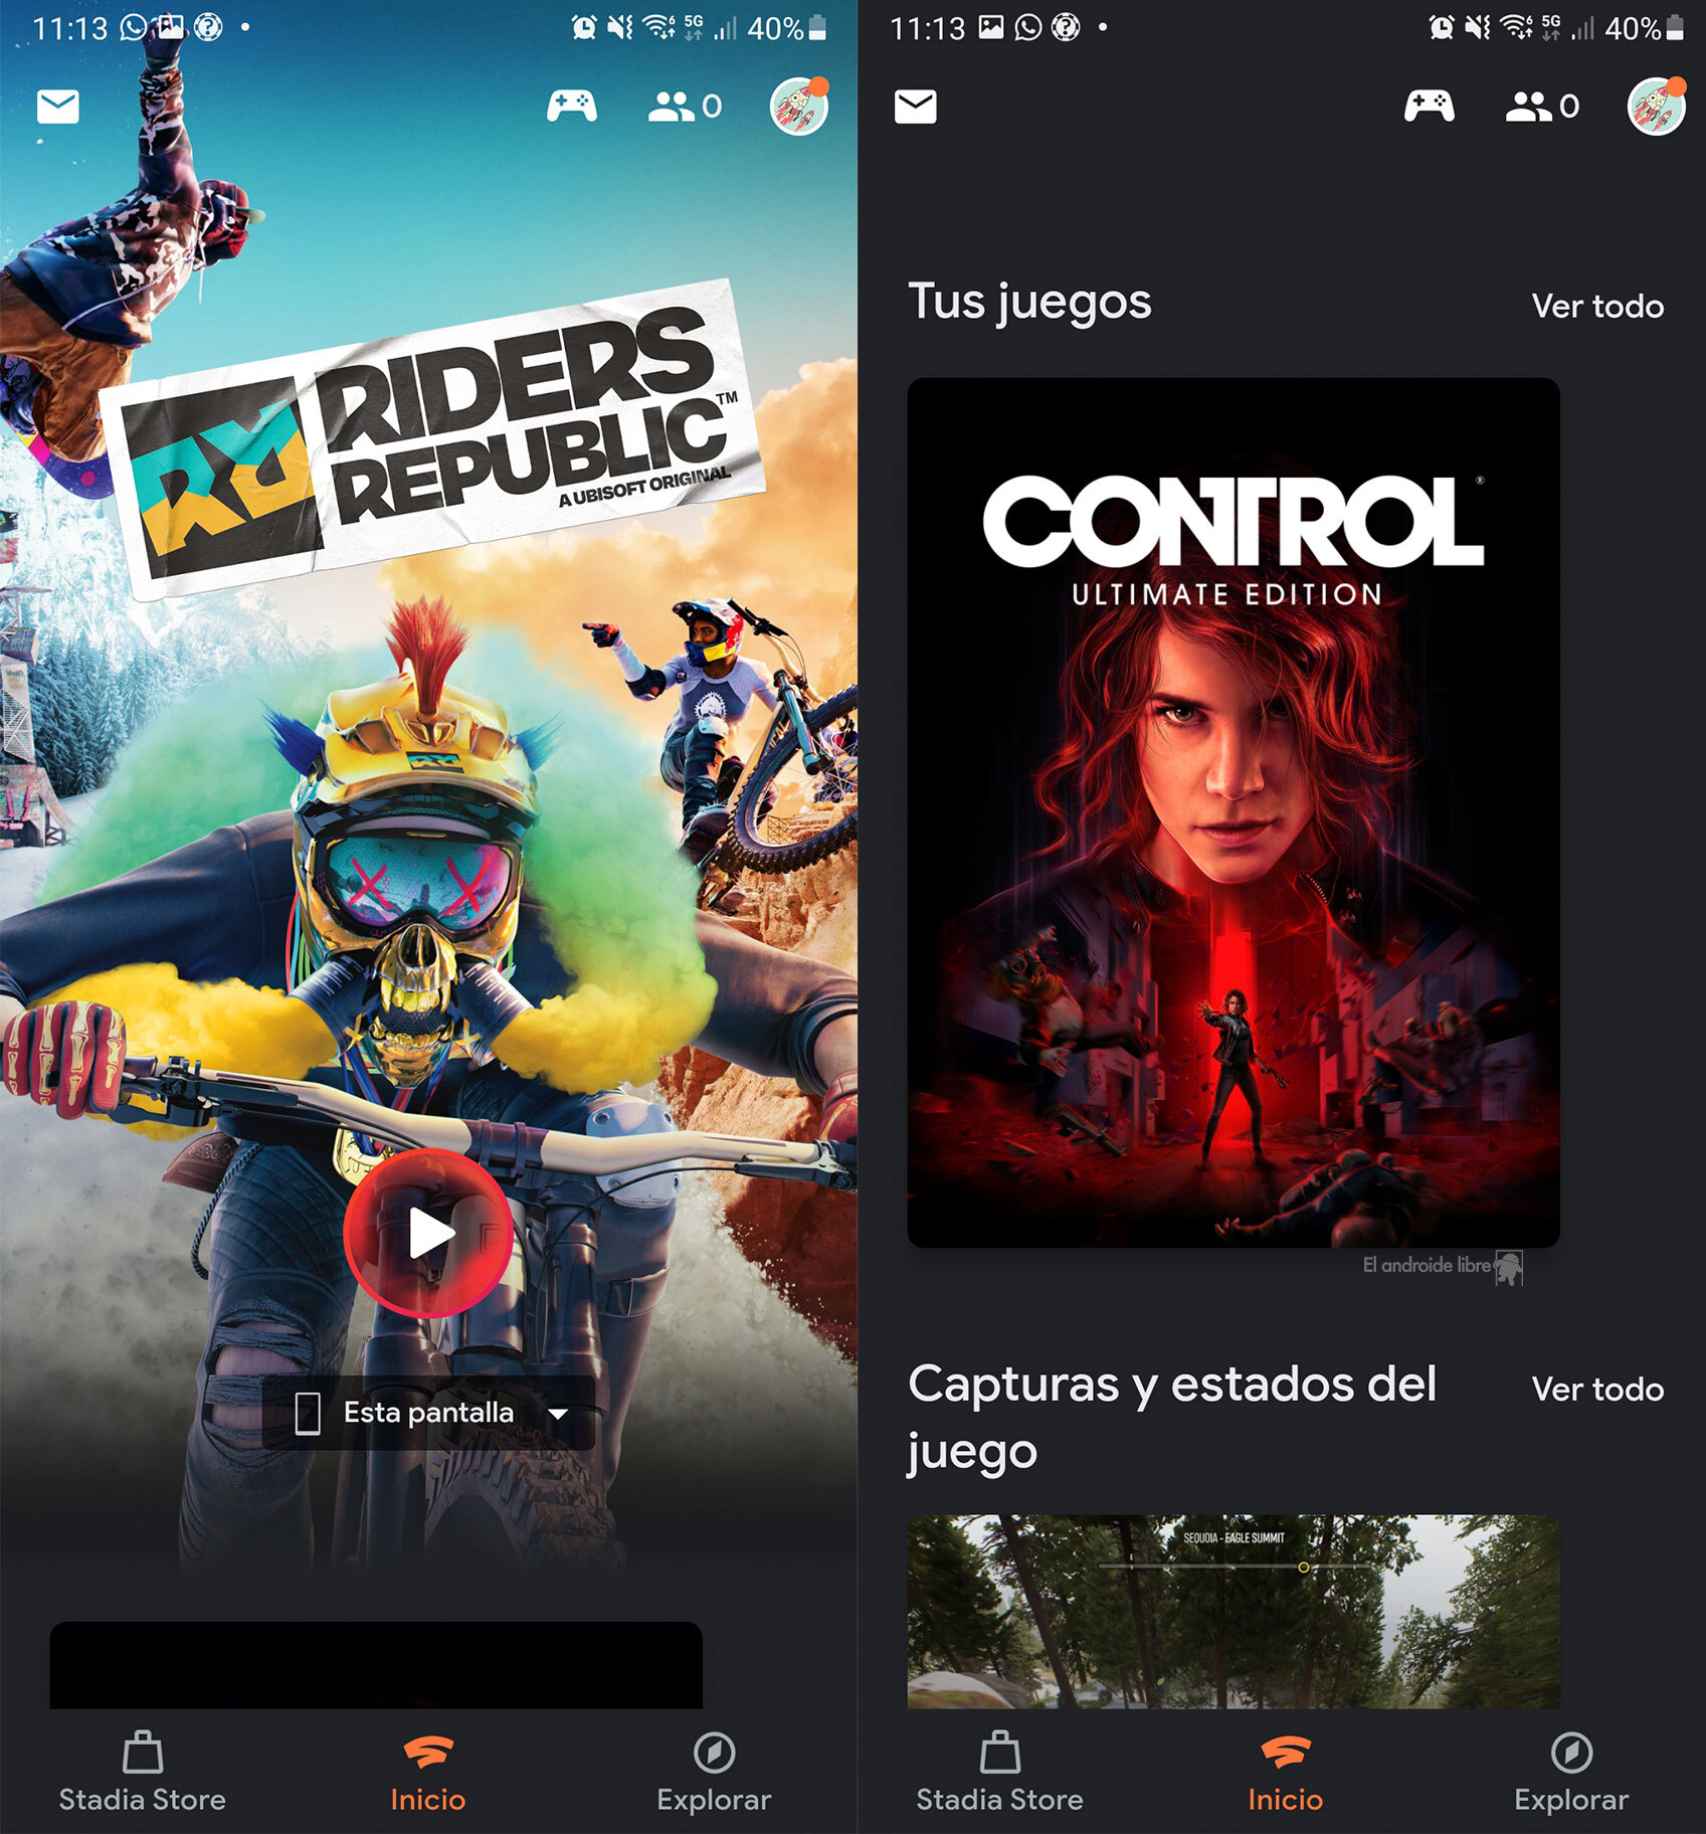 New Stadia games for free trial